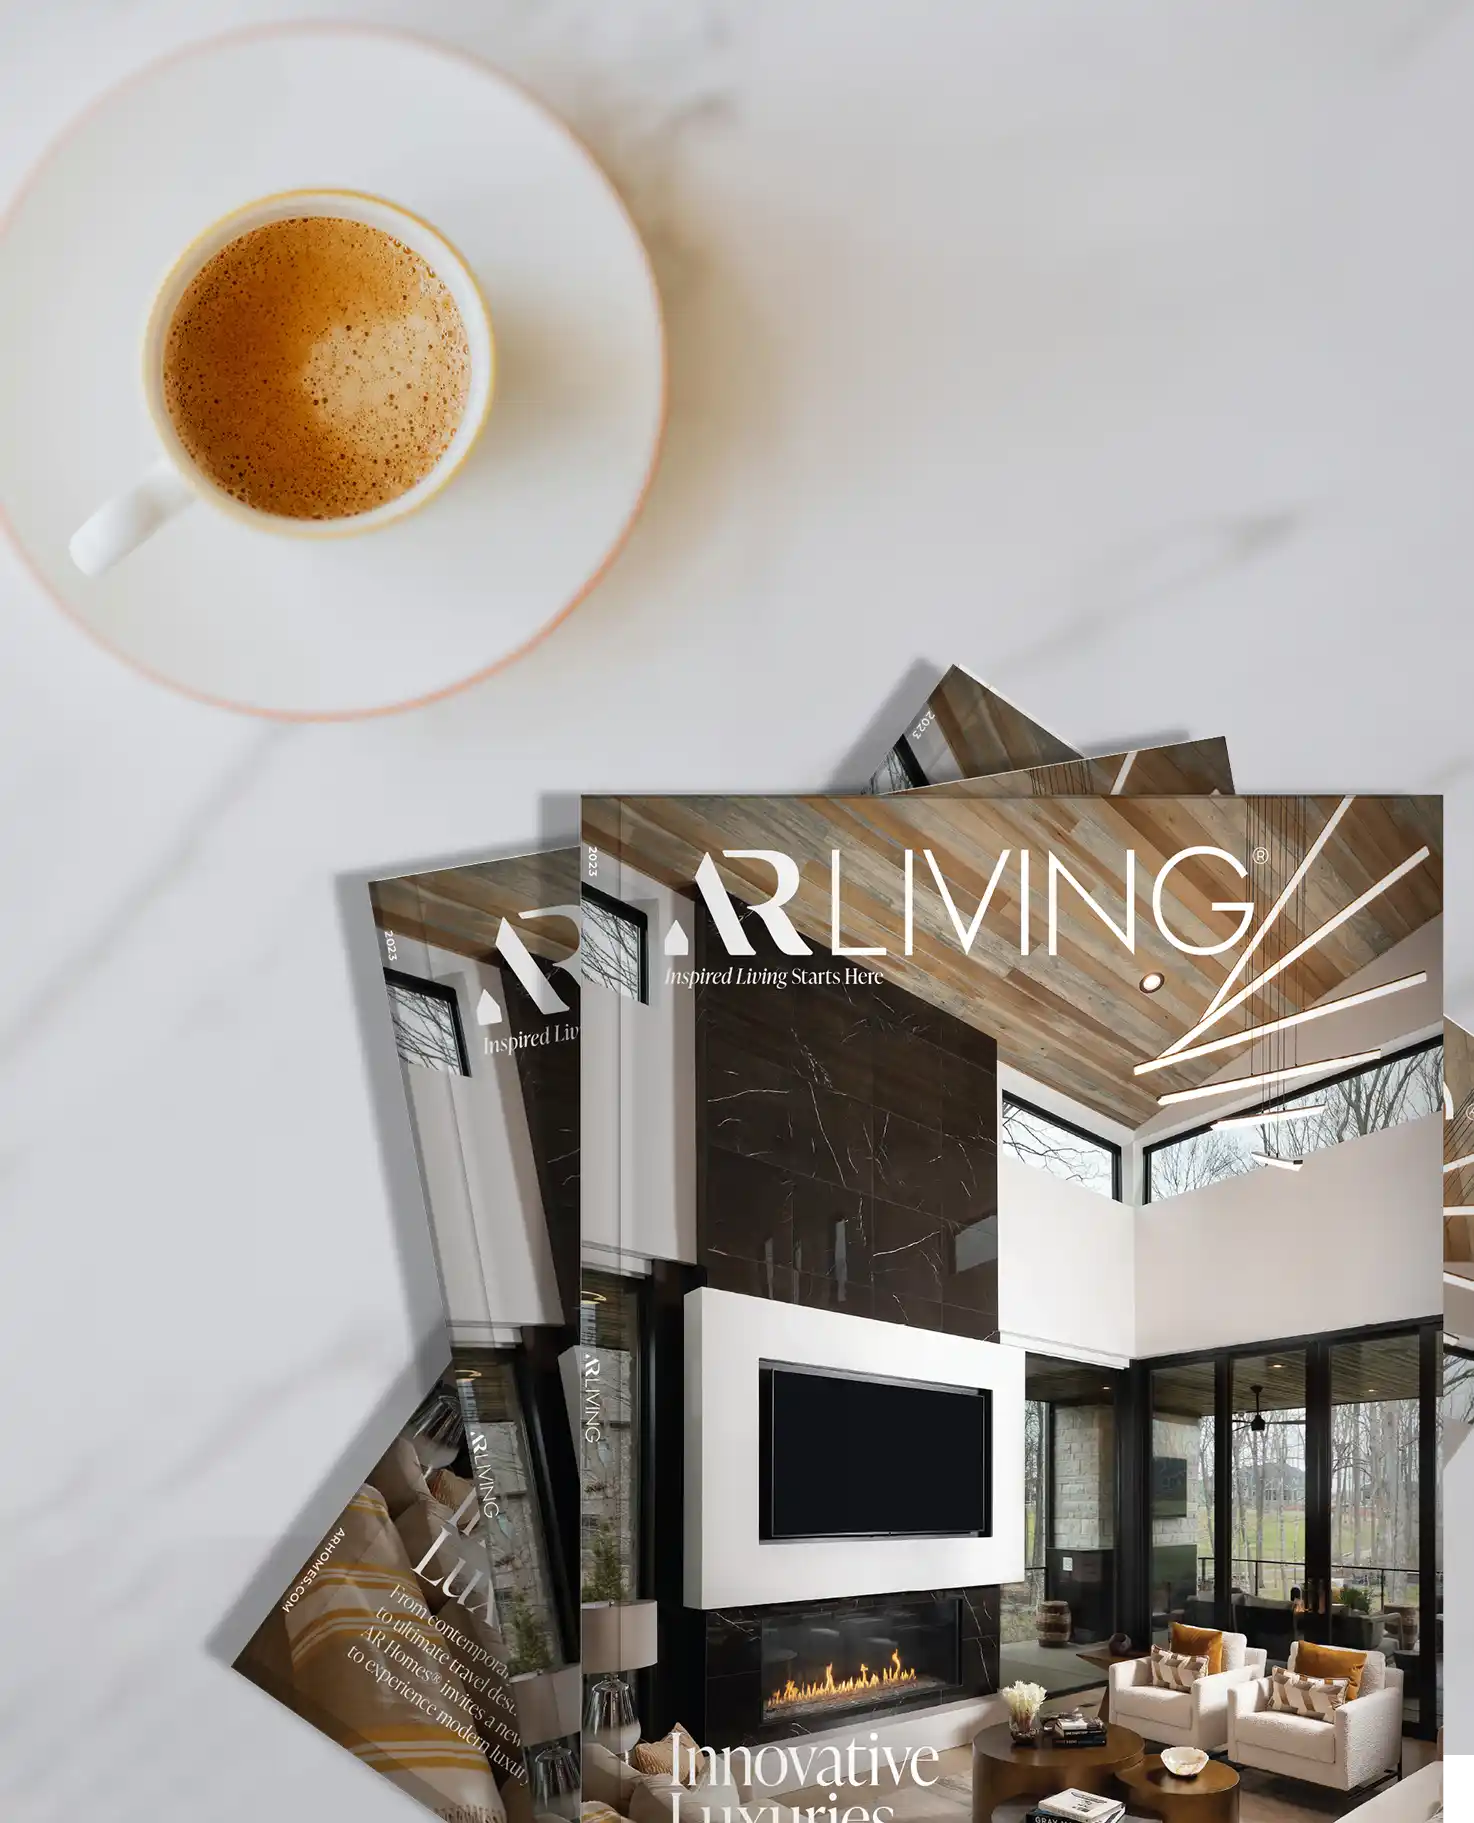 Let us send you a complimentary AR Living® Magazine